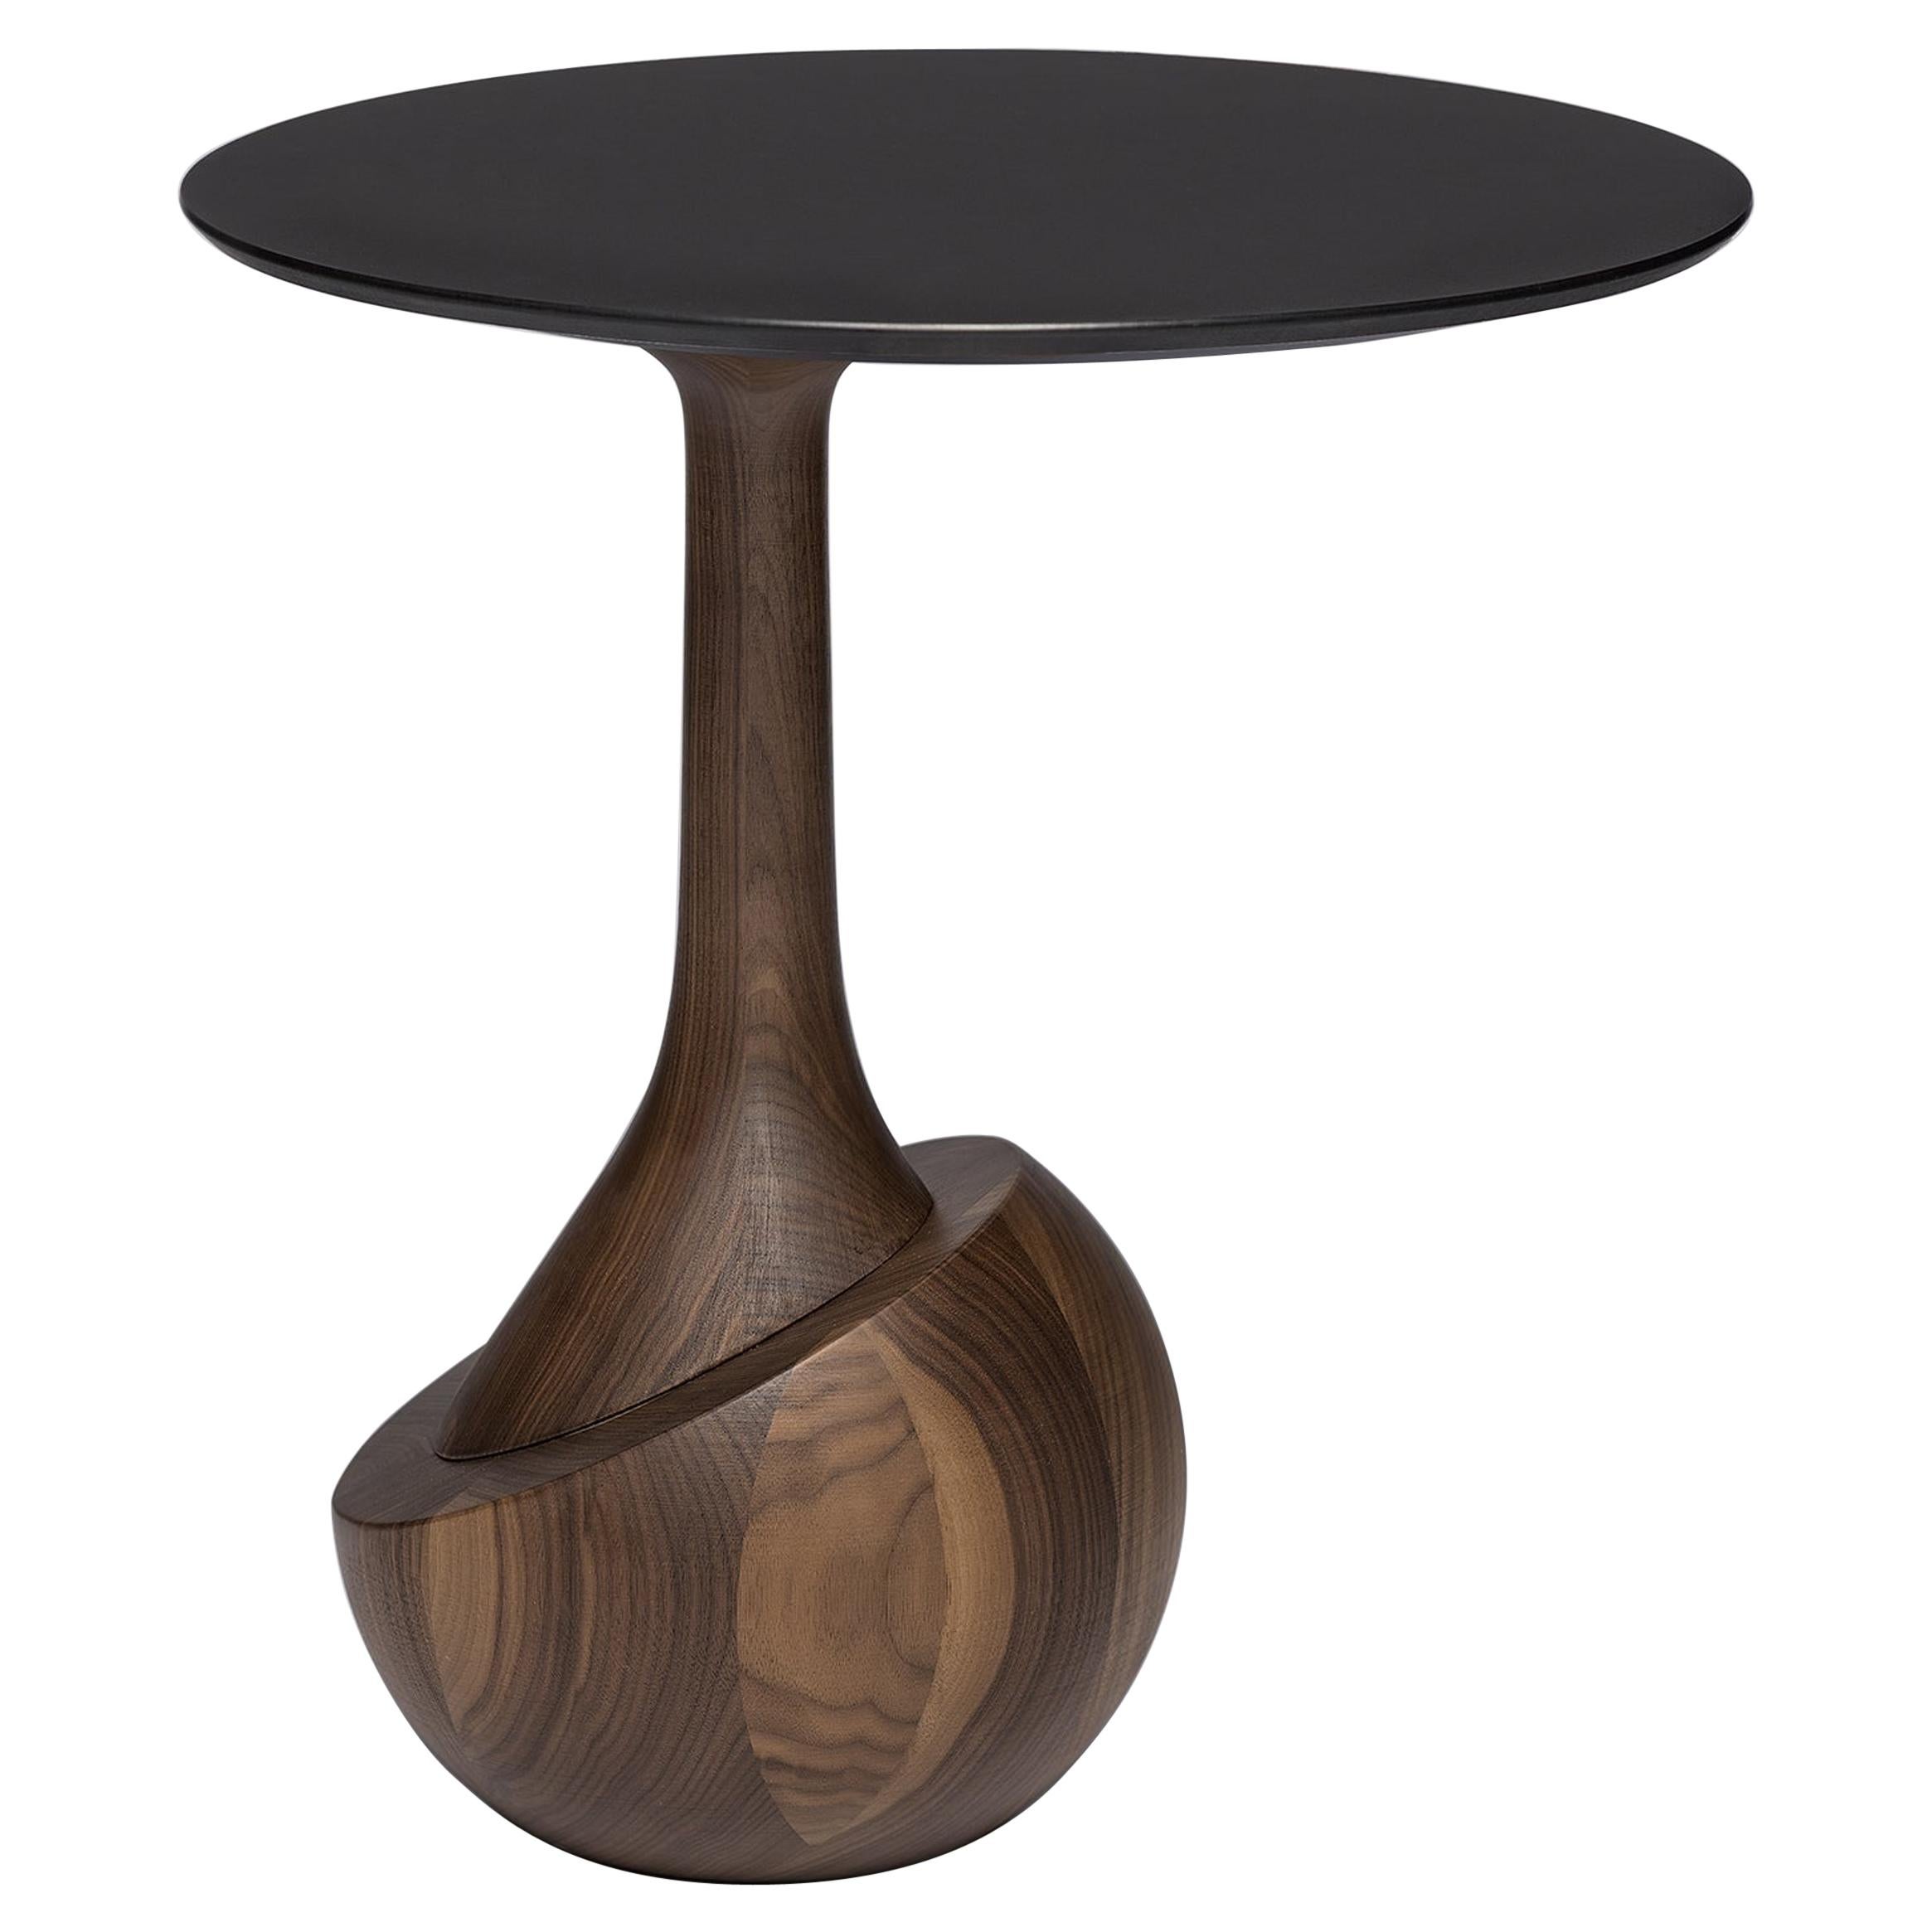 Contemporary Natural Wood, Sidetable, Canaletto Walnut, Handmade, Made in Italy For Sale